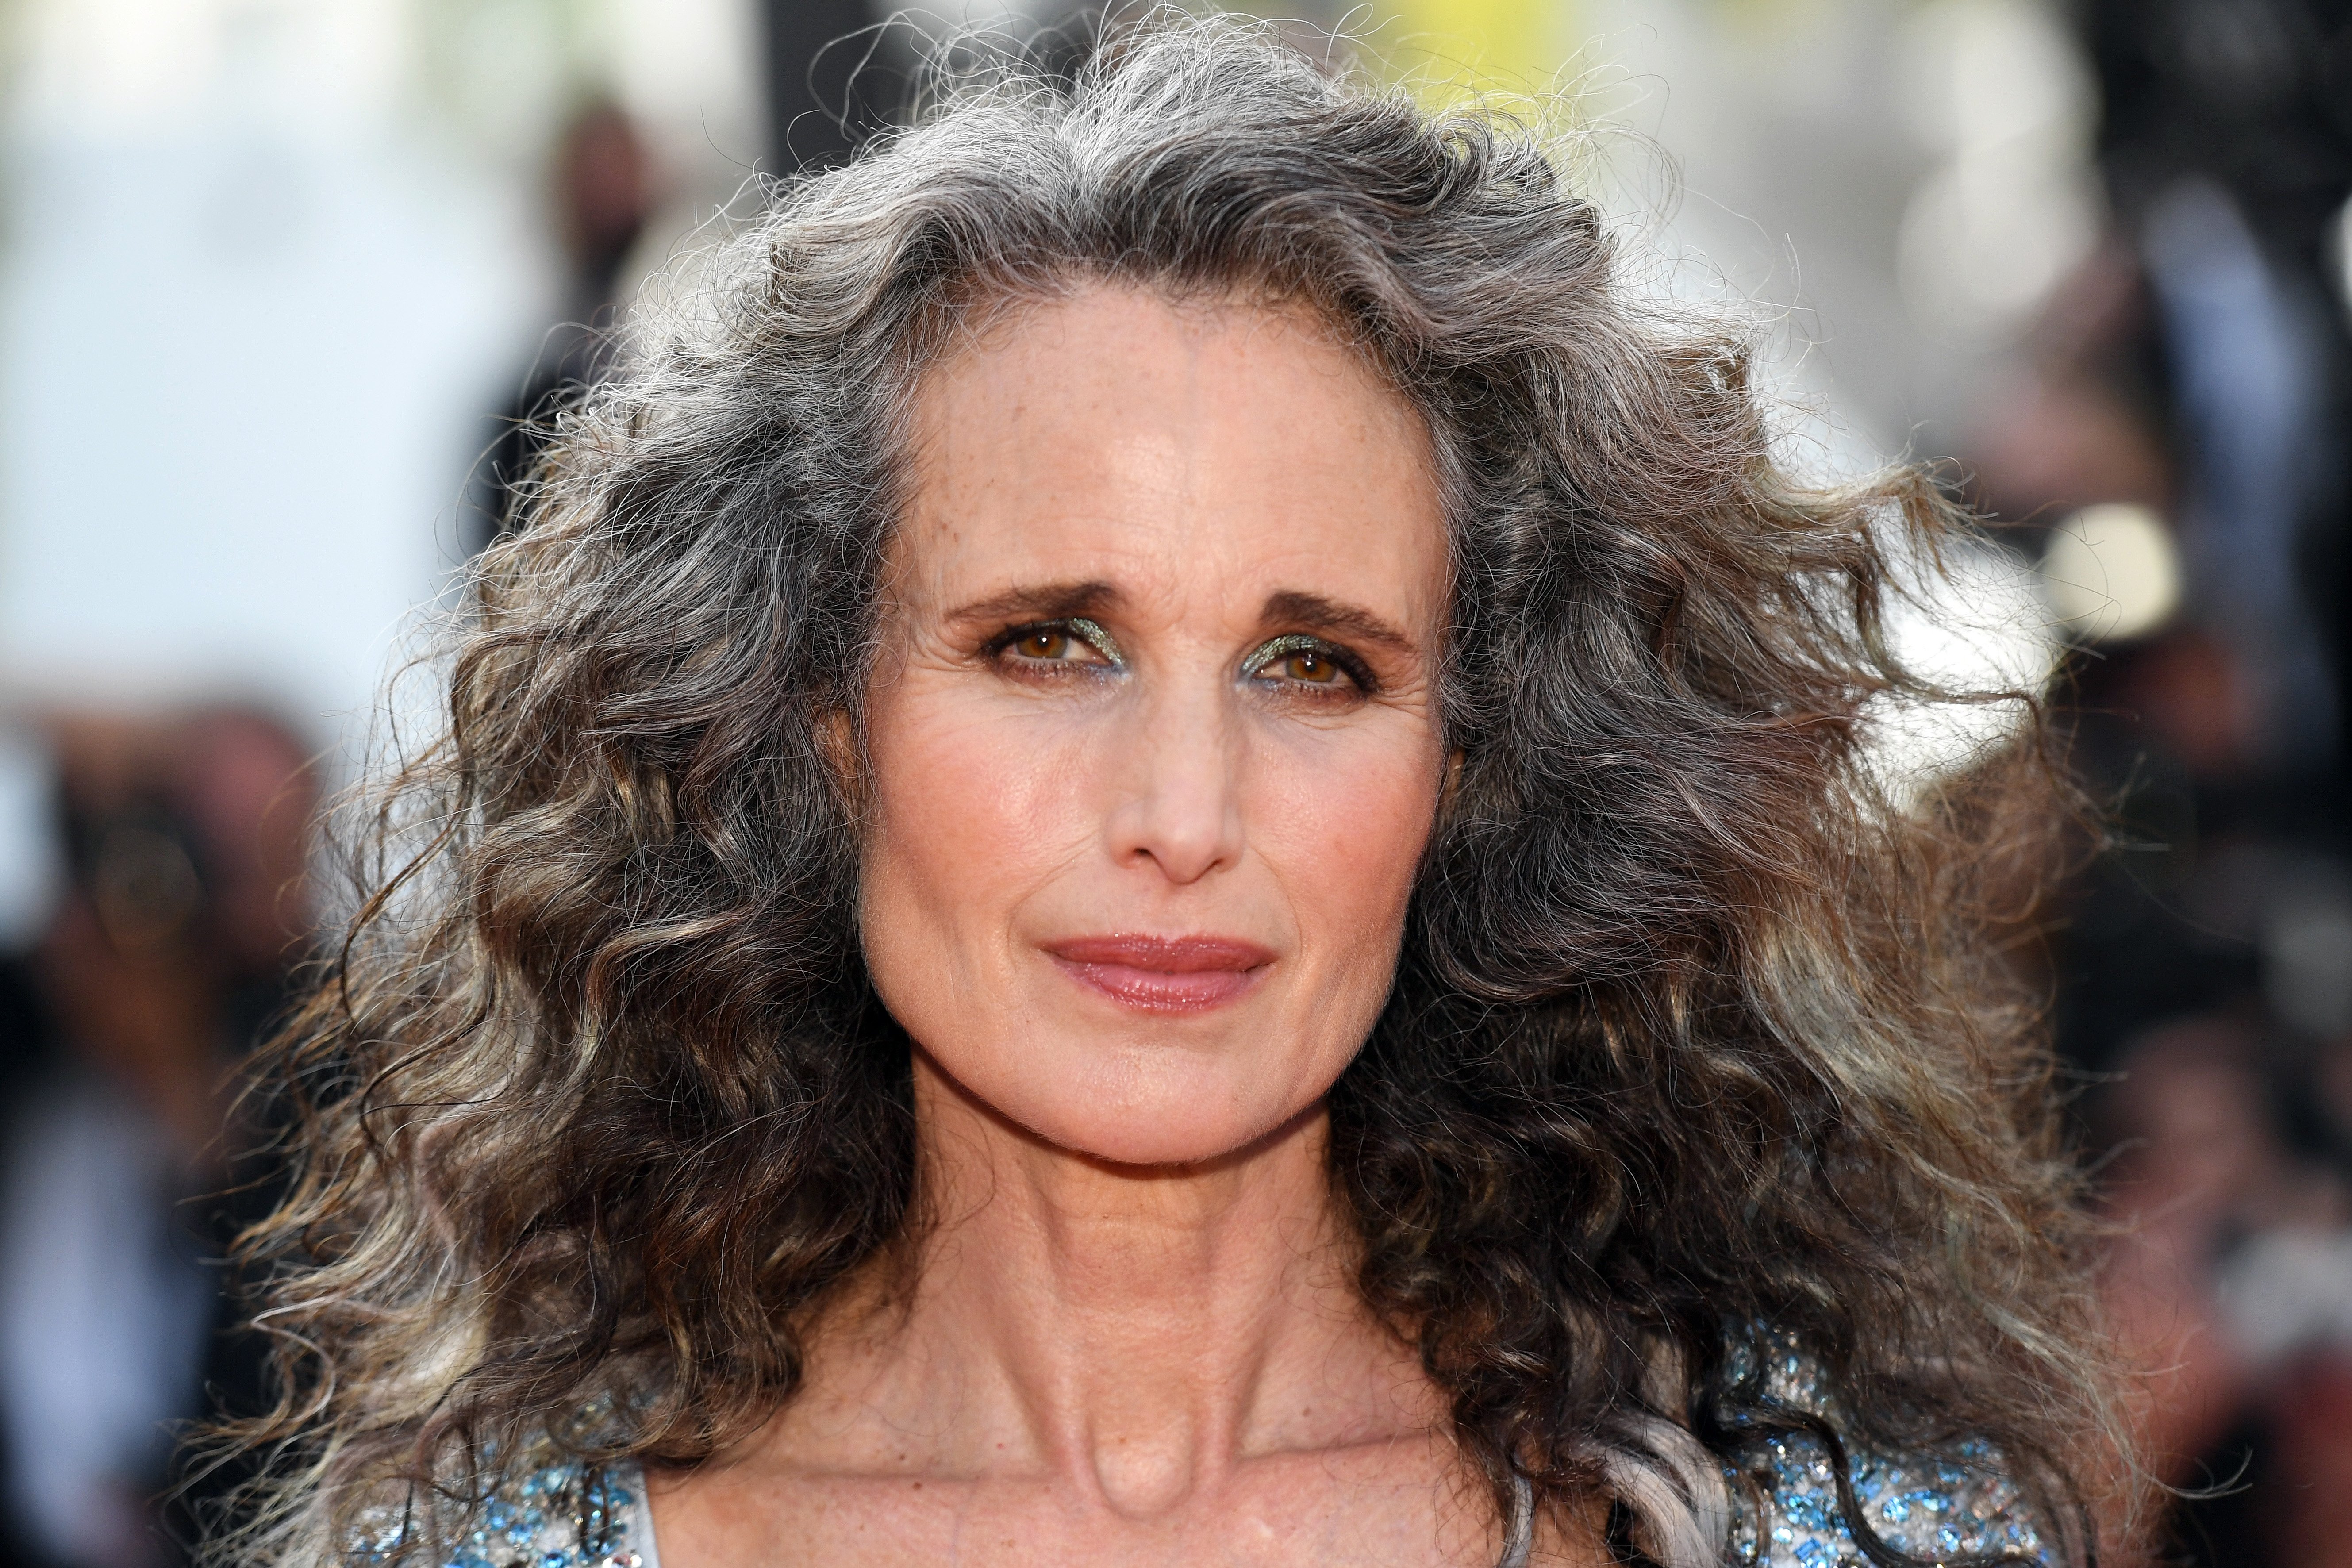 Andie MacDowell am 06. Juli 2021 in Cannes, Frankreich | Quelle: Getty Images